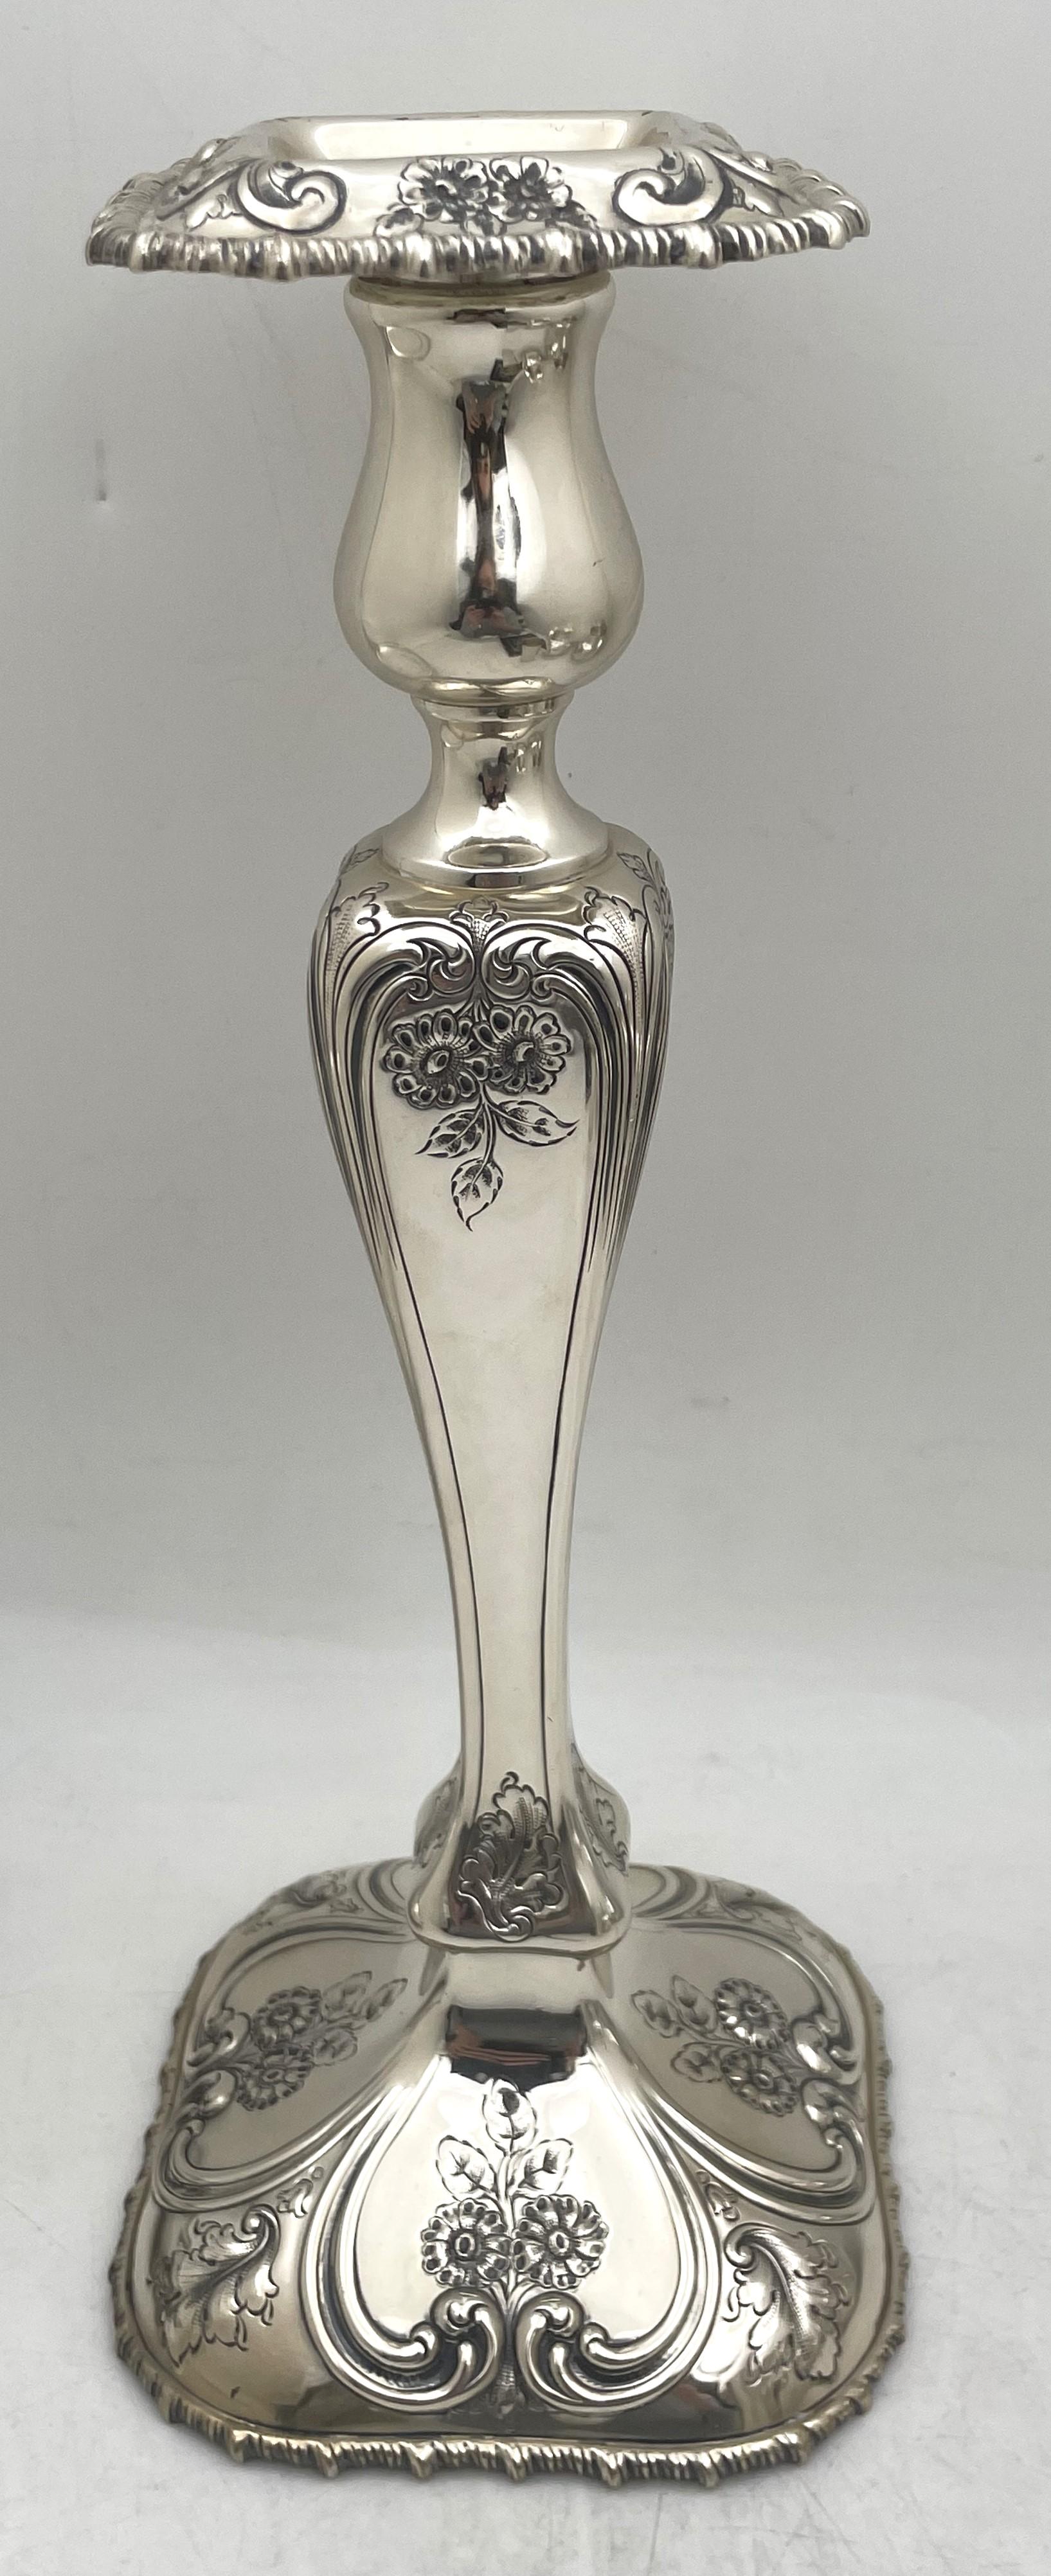 Shreve & Co. pair of sterling silver candlesticks in Art Nouveau style from the early 20th century, beautifully adorned with floral and curvilinear motifs. They measure 12 3/4'' in height by 5 1/4'' in depth, are weighted (gross weight is 55 troy